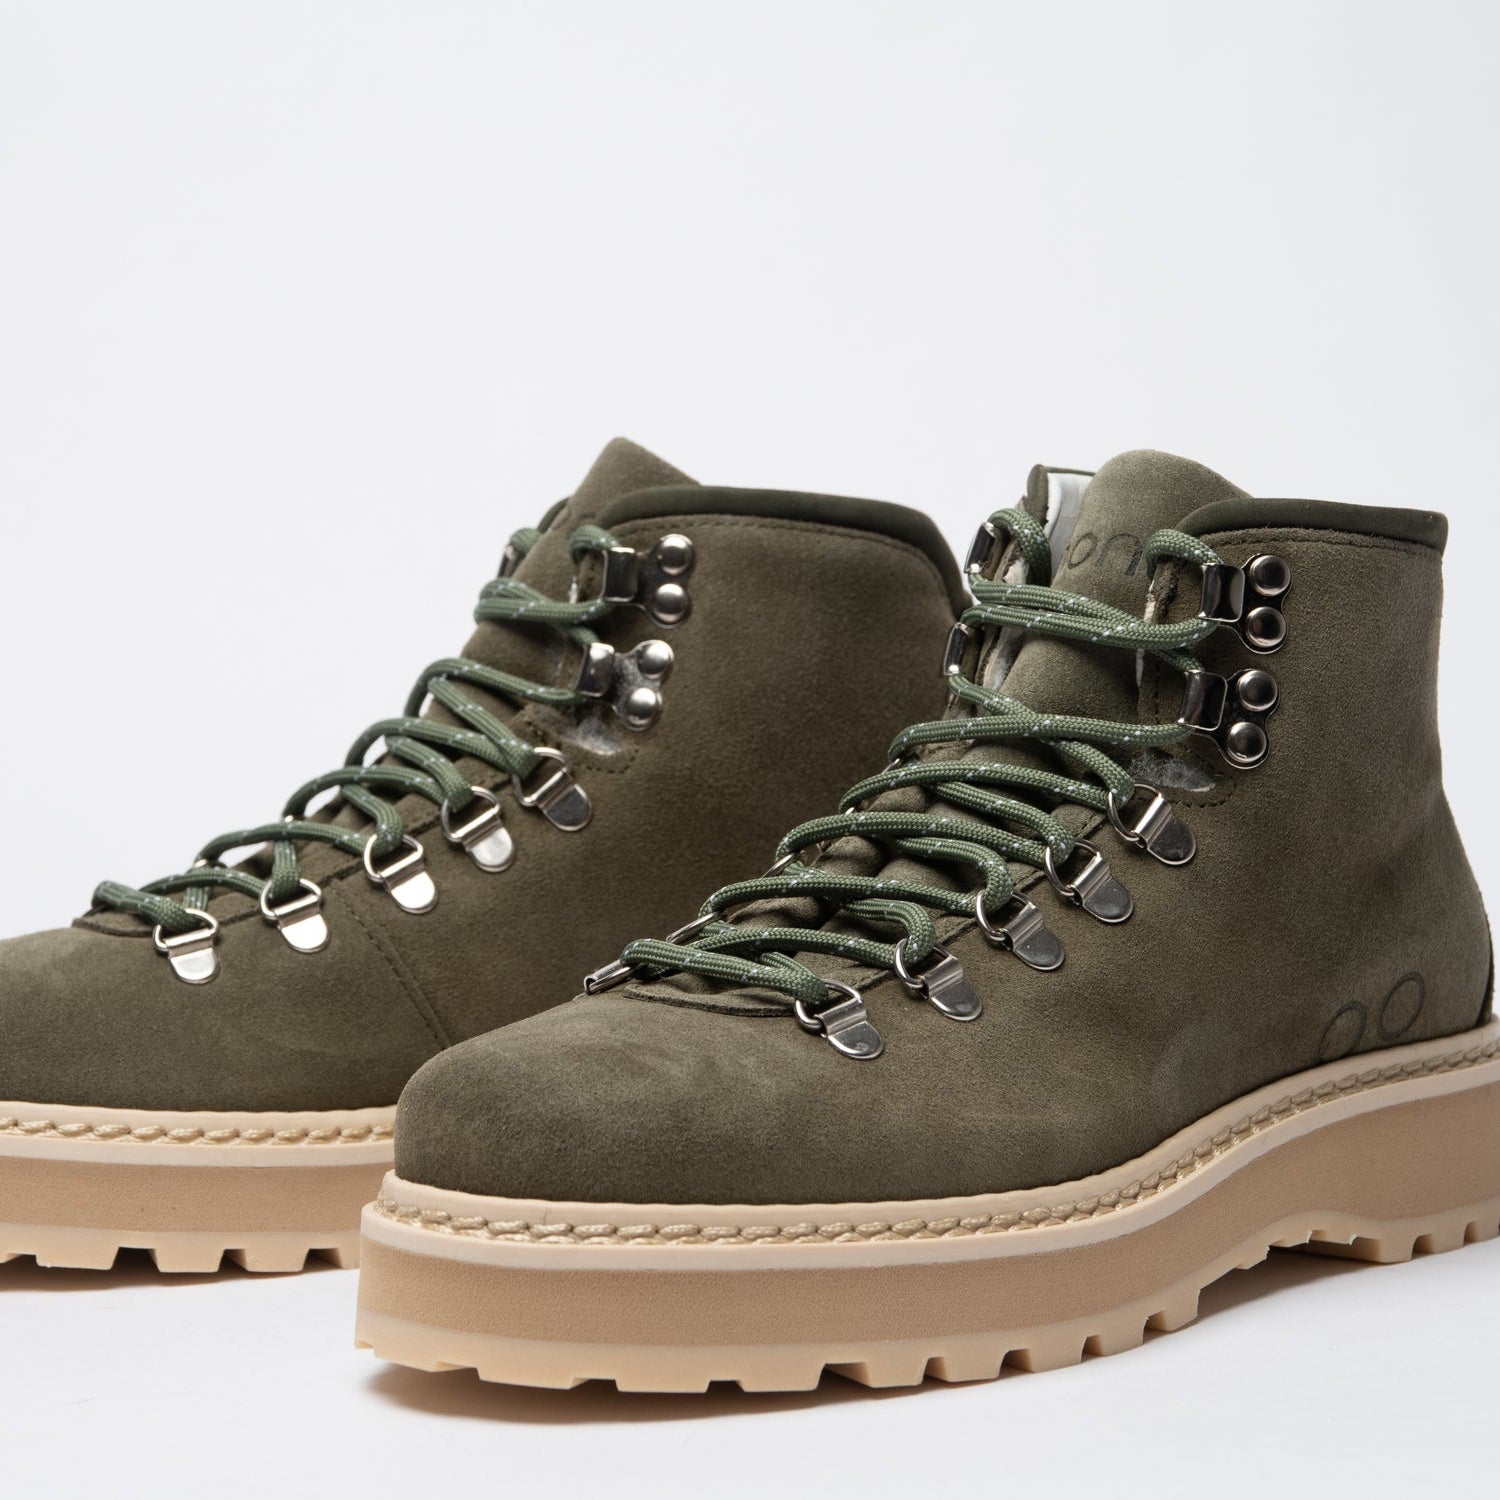 Hiking Core - Suede - Shearling Lining - Mens